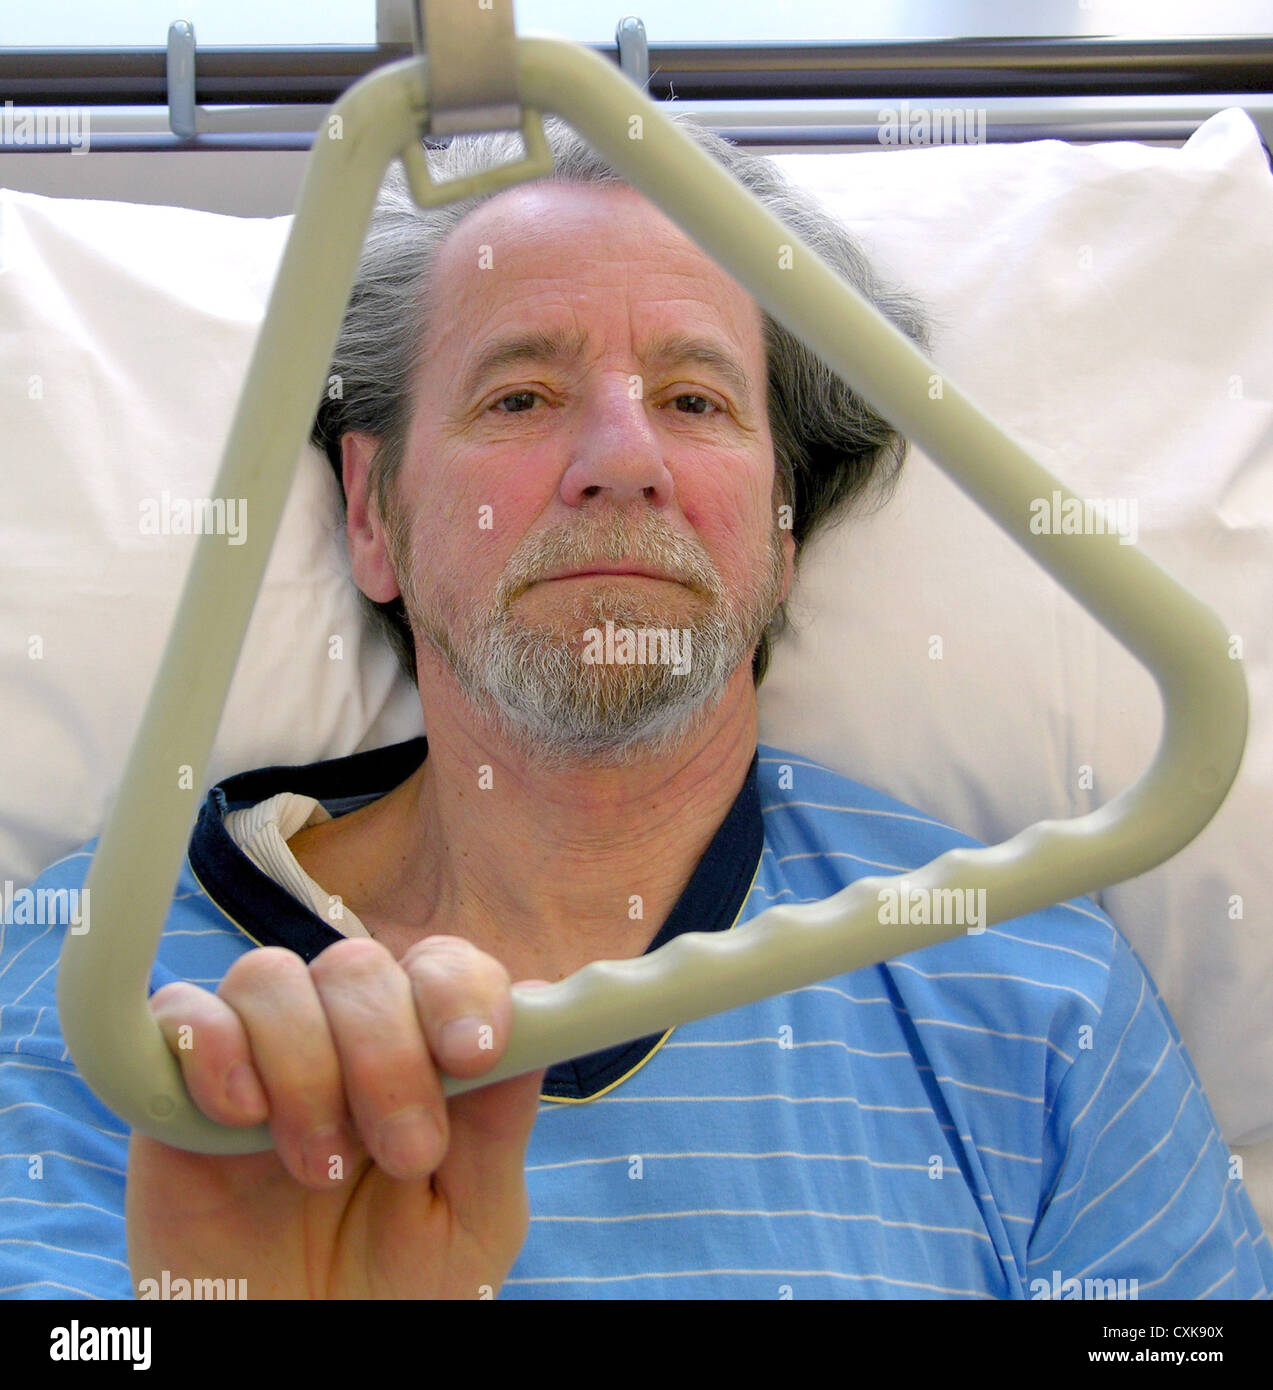 Man in a hospital bed Stock Photo